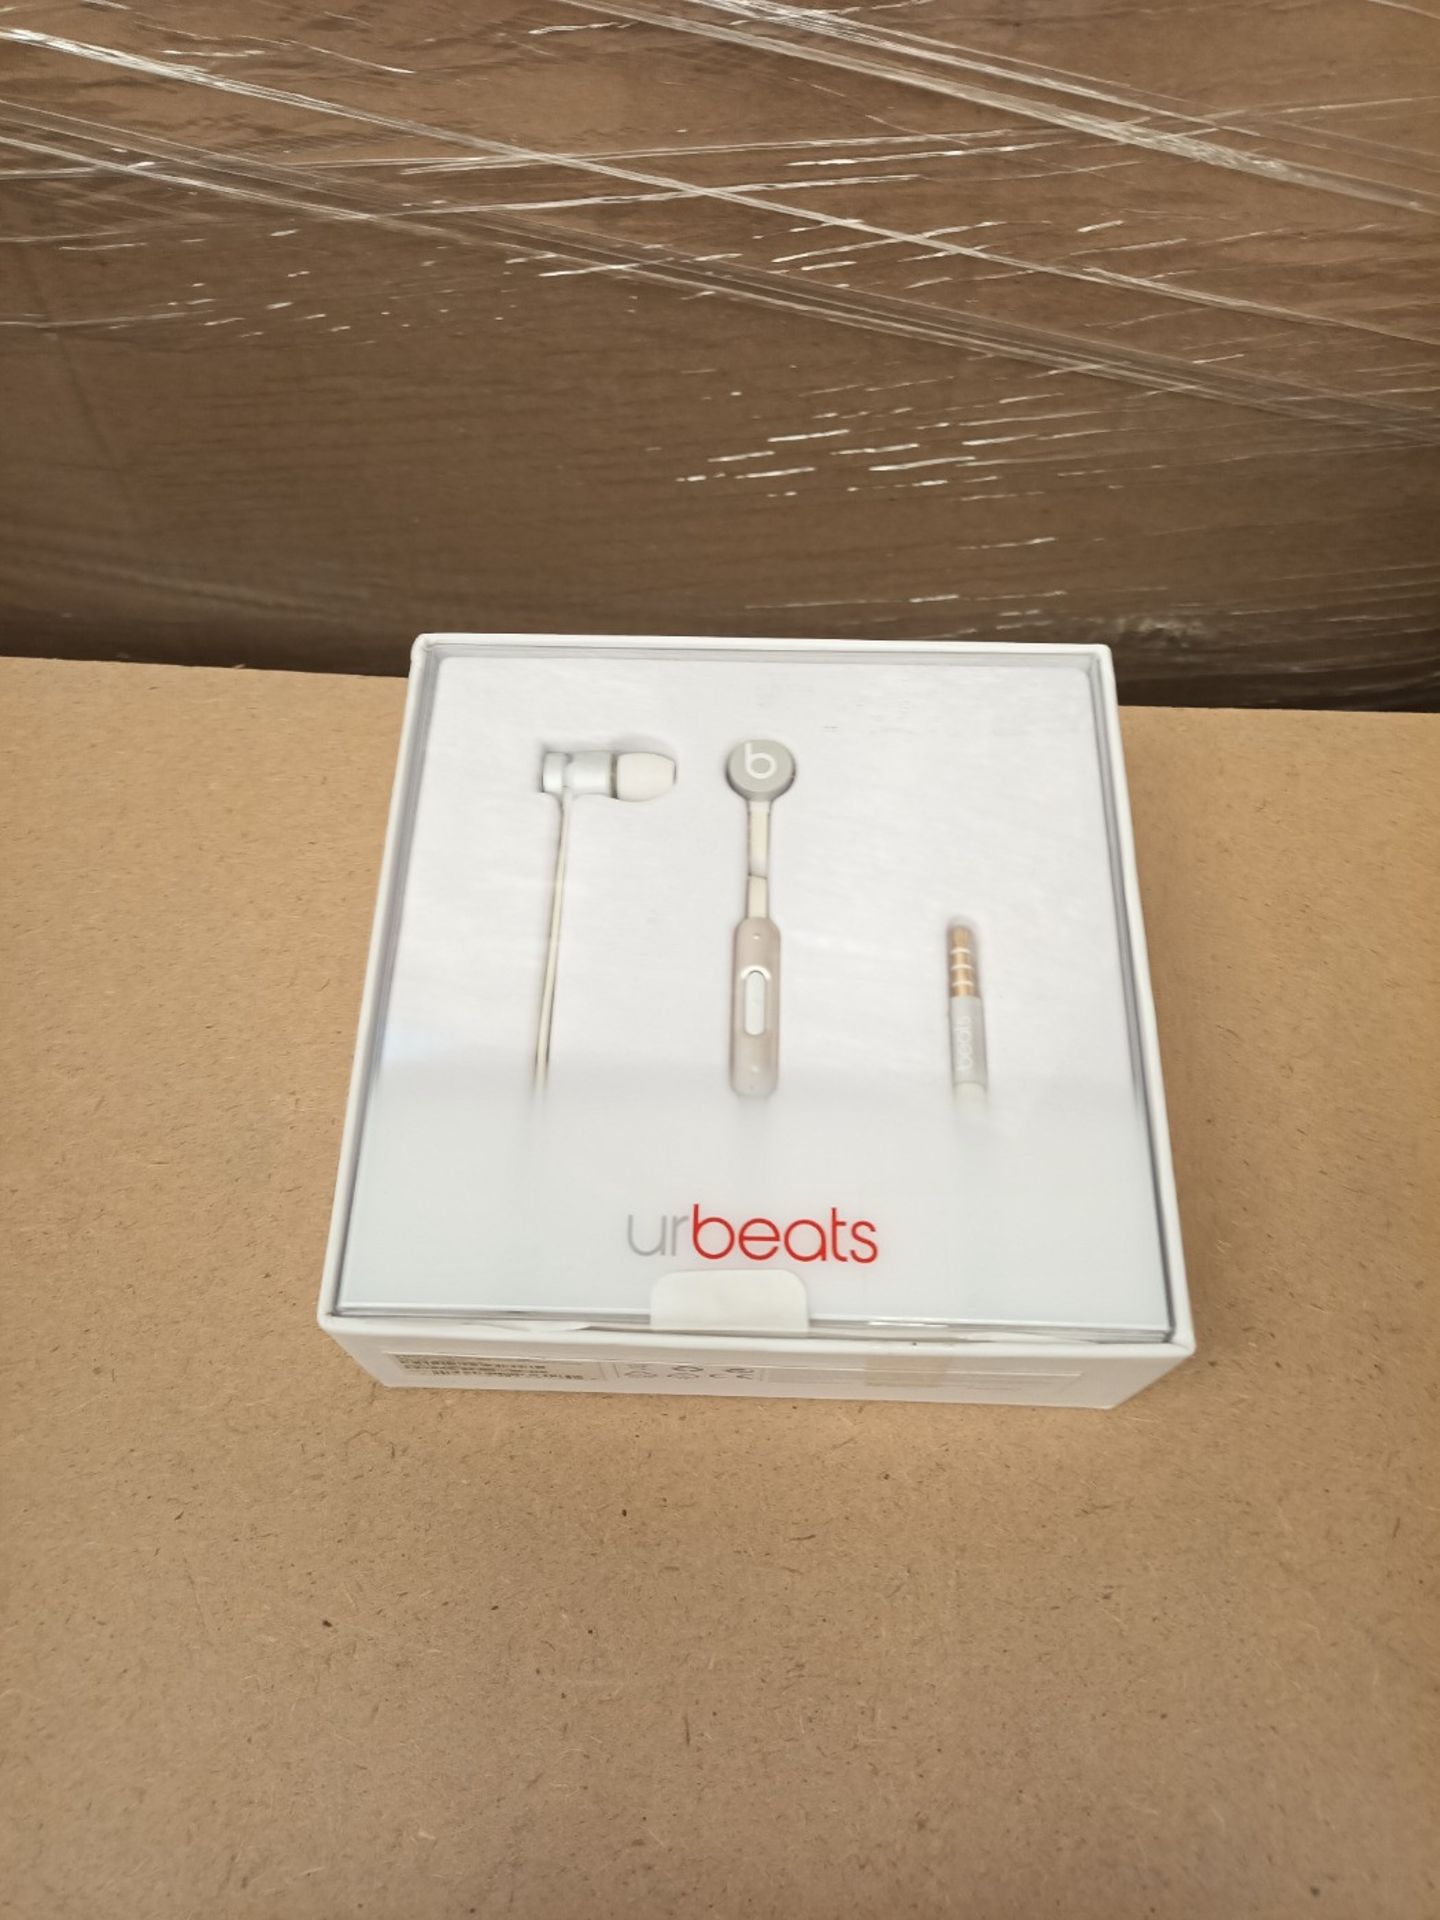 RRP £99.00 Beats by Dr. Dre Urbeats In-Ear Headphones - Silver - Image 2 of 3